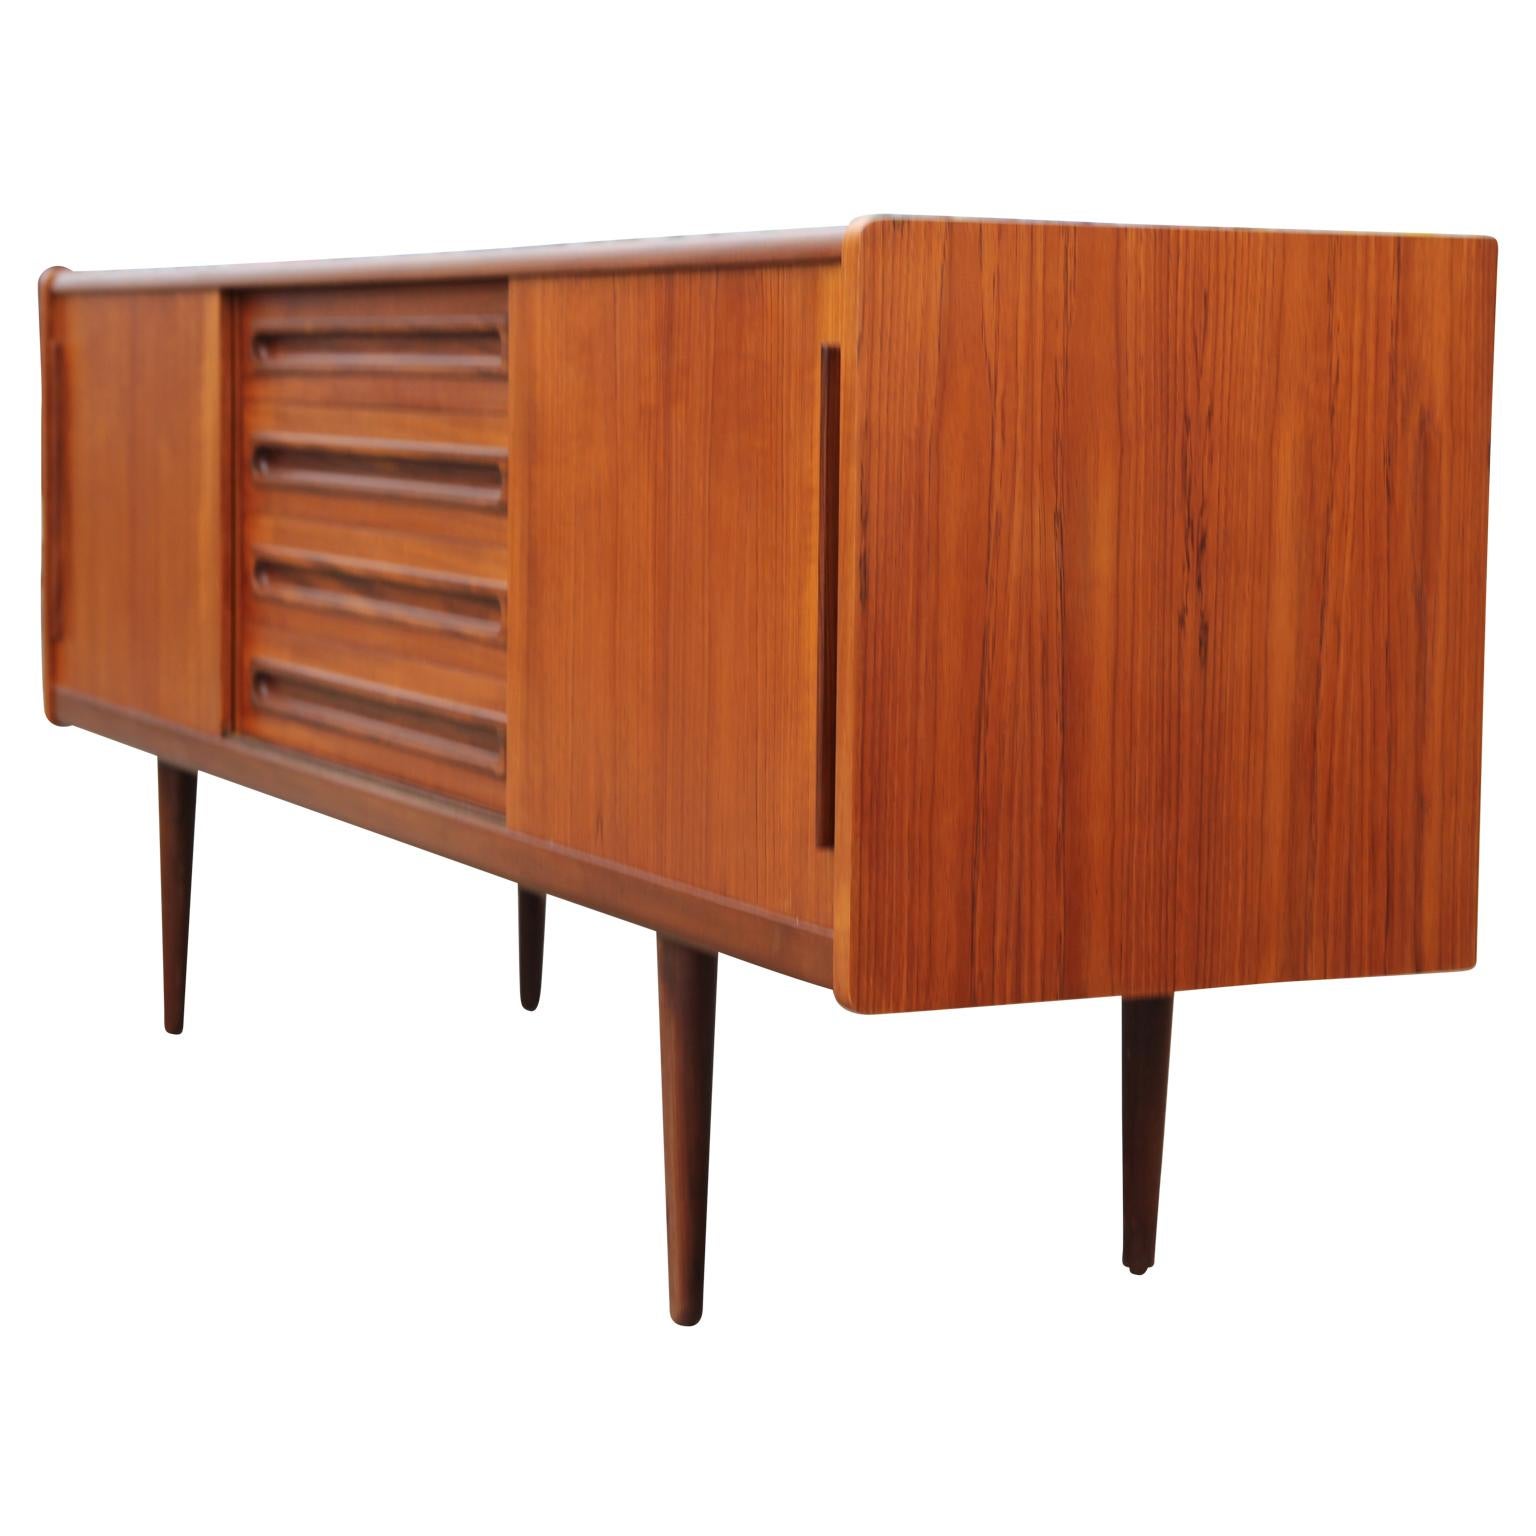 Danish Modern Teak Sideboard / Credenza with Drawers and Sliding Door Cabinets 1